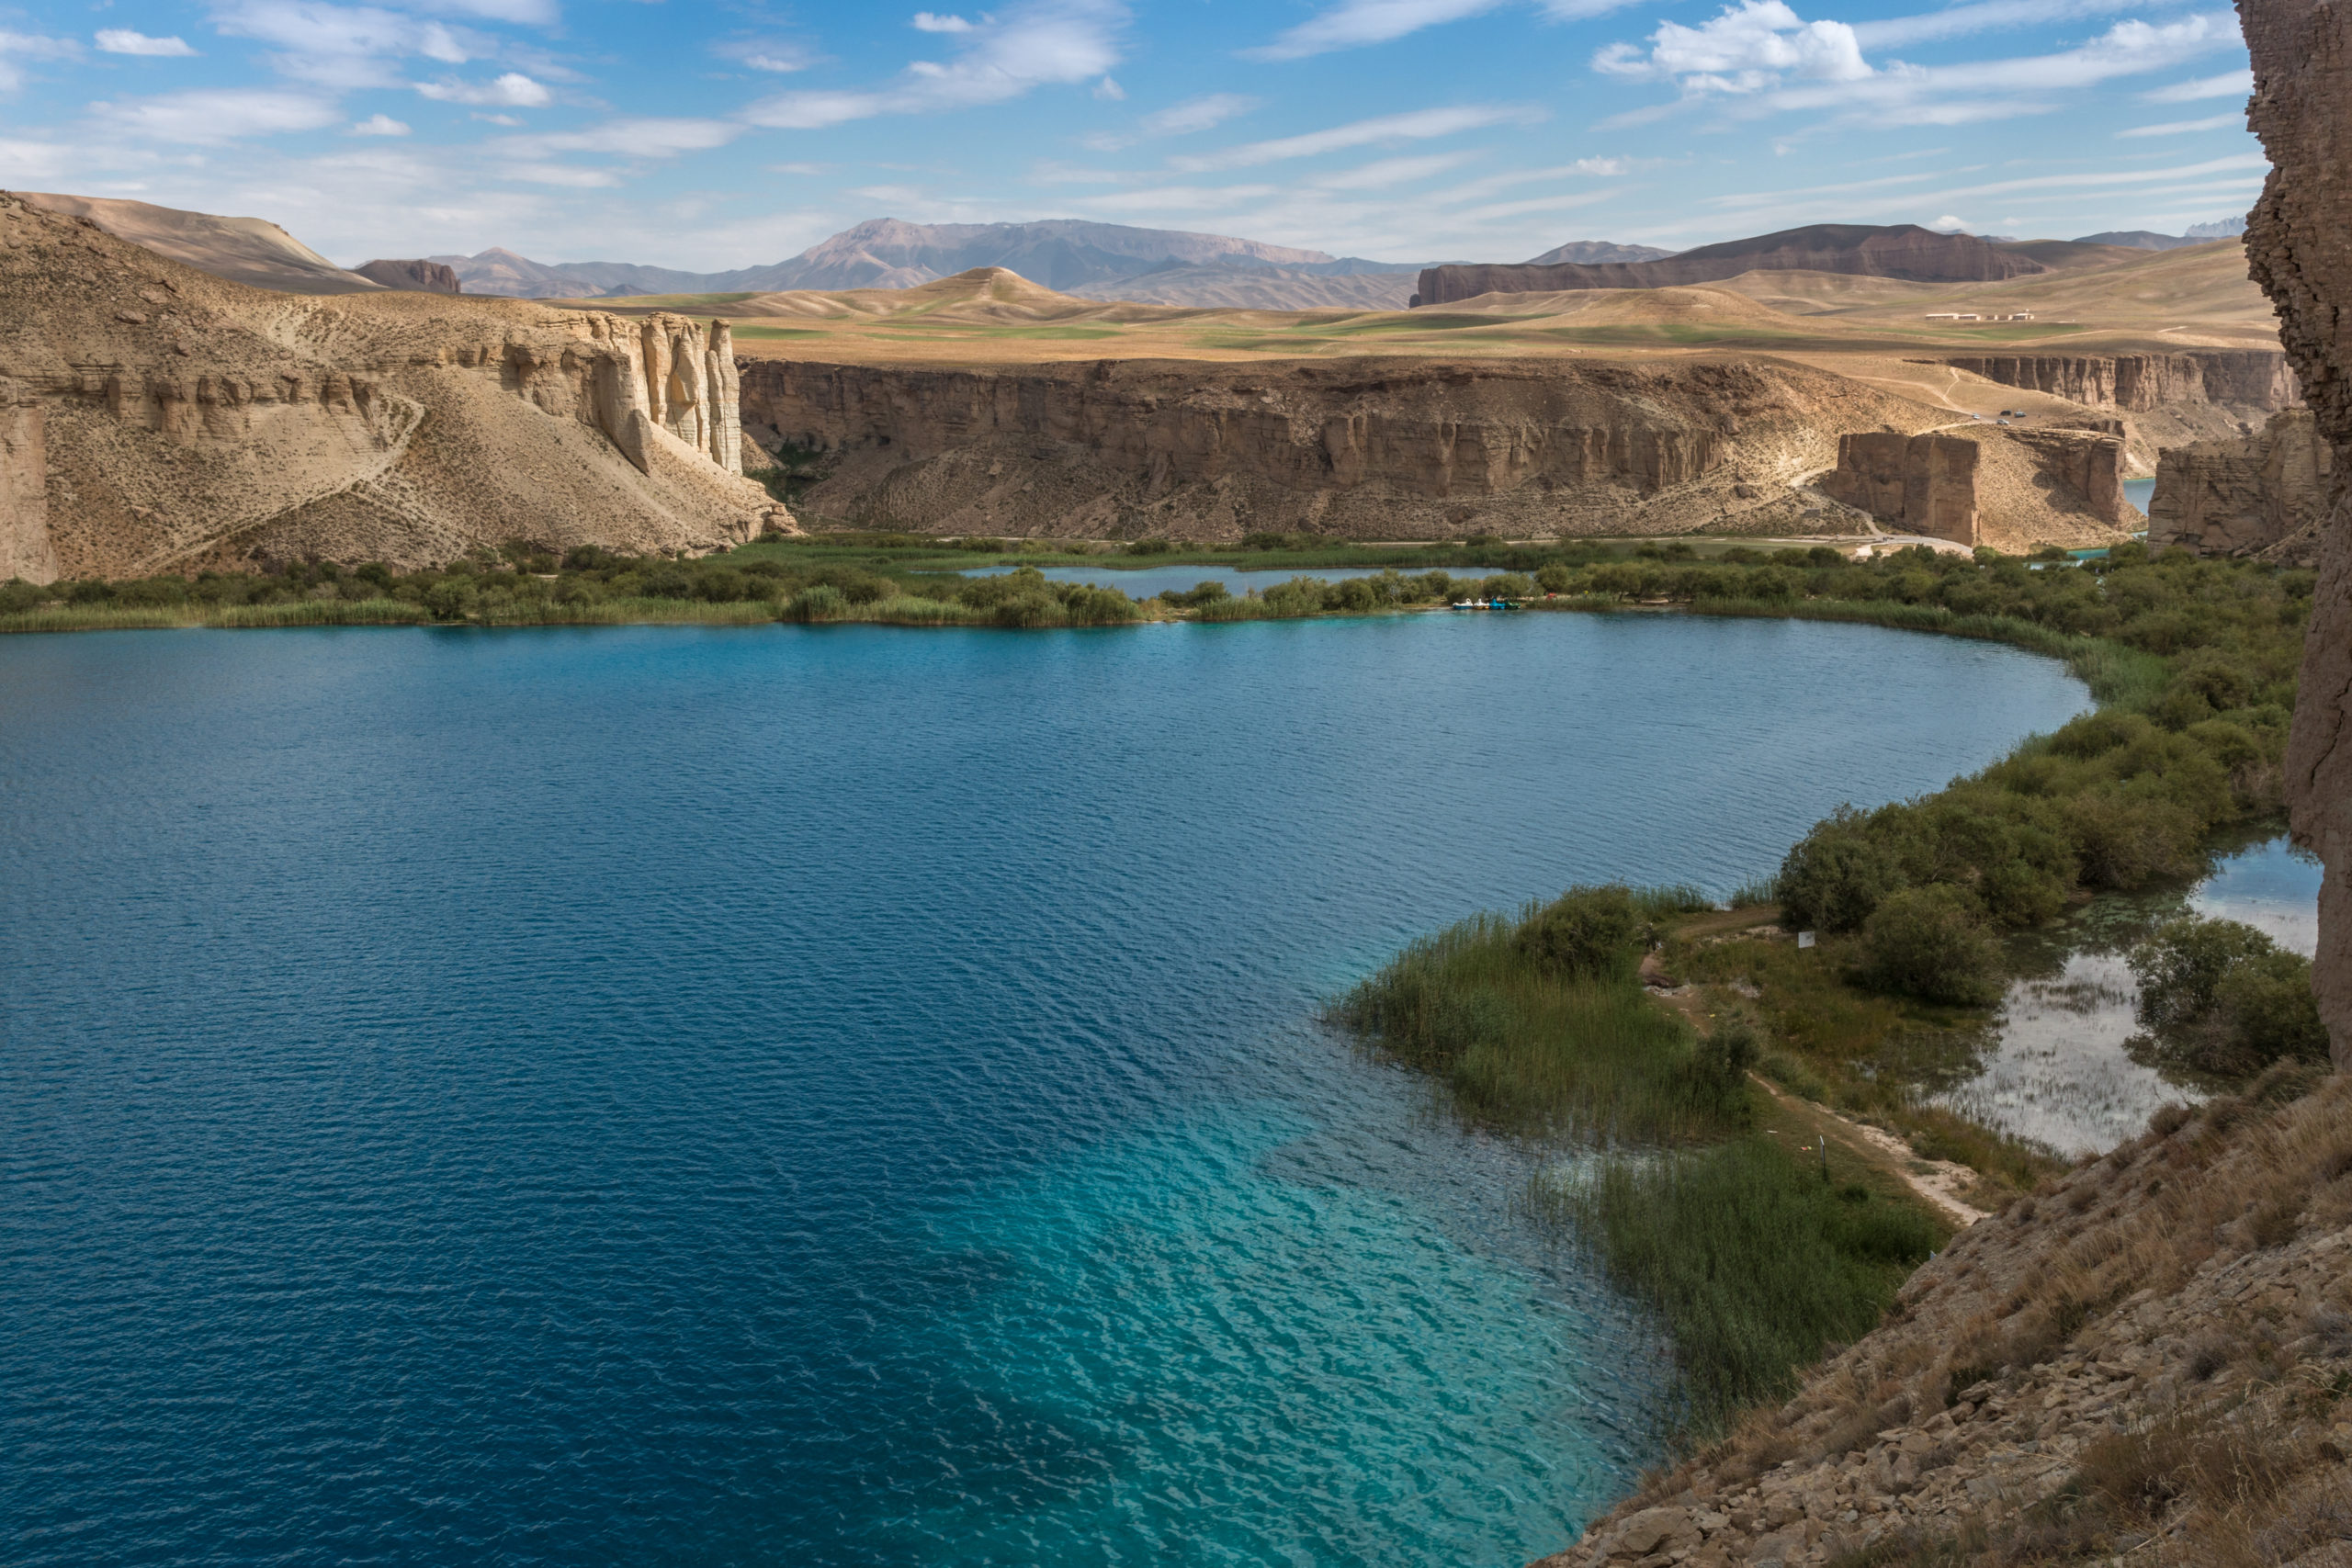 Afghanistan's first national park is Band-e-Amir in Bamyan